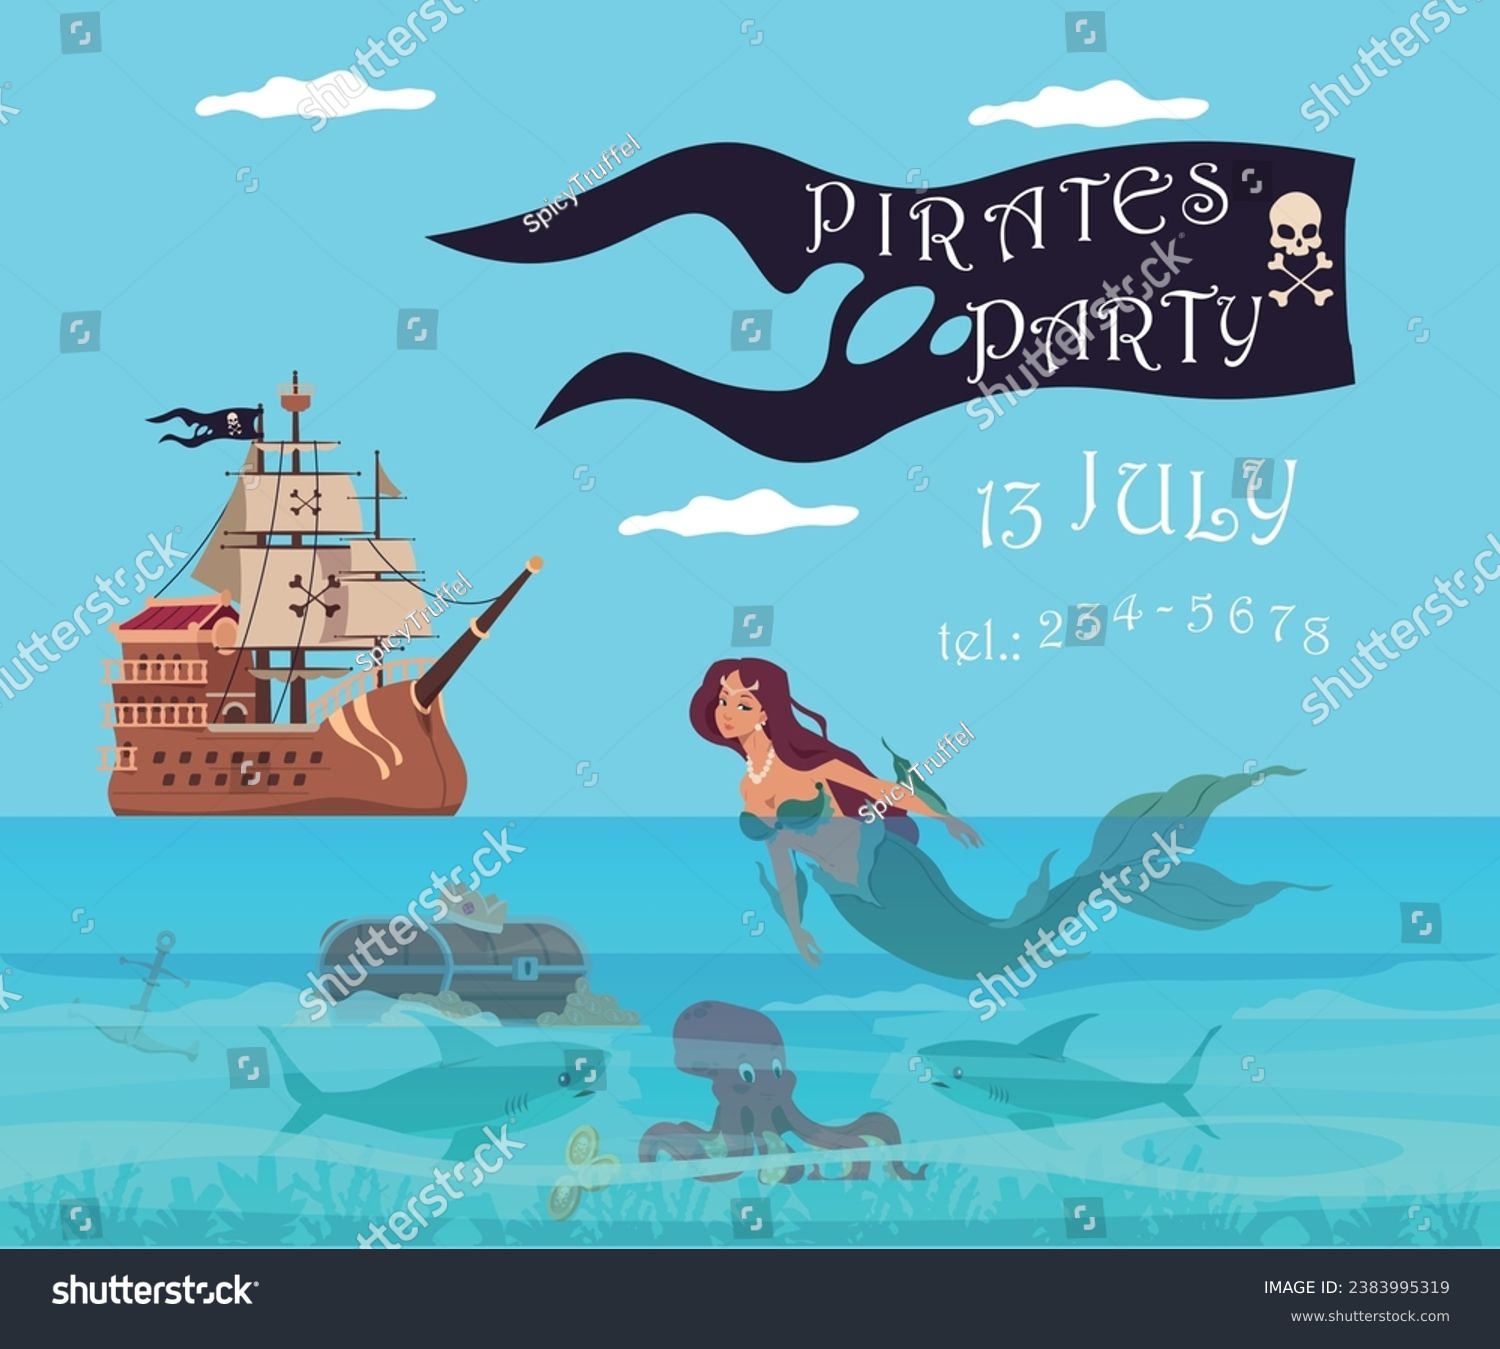 SVG of Pirate party invitation banner. Filibuster wooden ship. Sailing boat. Mermaid in sea waves. Treasure chest. Buccaneers adventure. Children holiday invite. Vector greeting card design svg